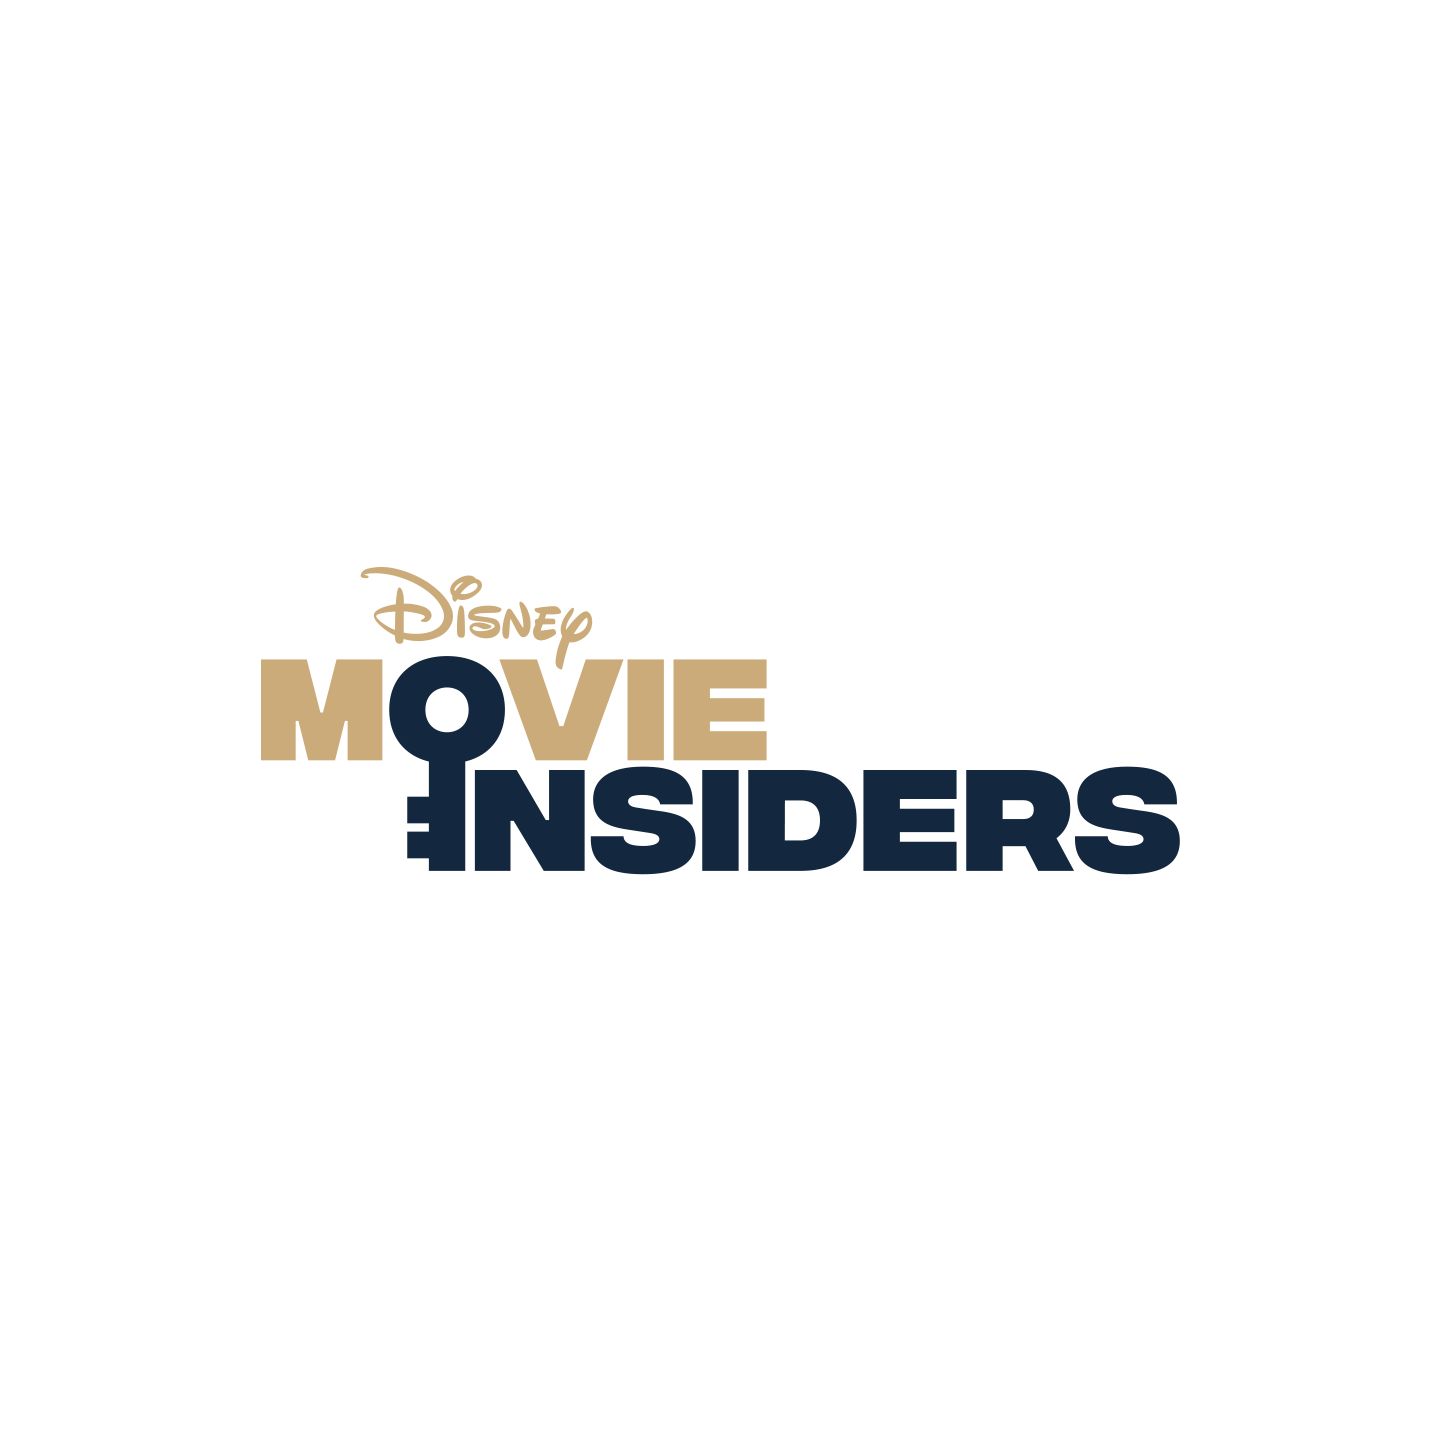 Disney Movie Insiders | The Insider 5 featuring: Live at the Bob's Burgers Opening Night Fan Event